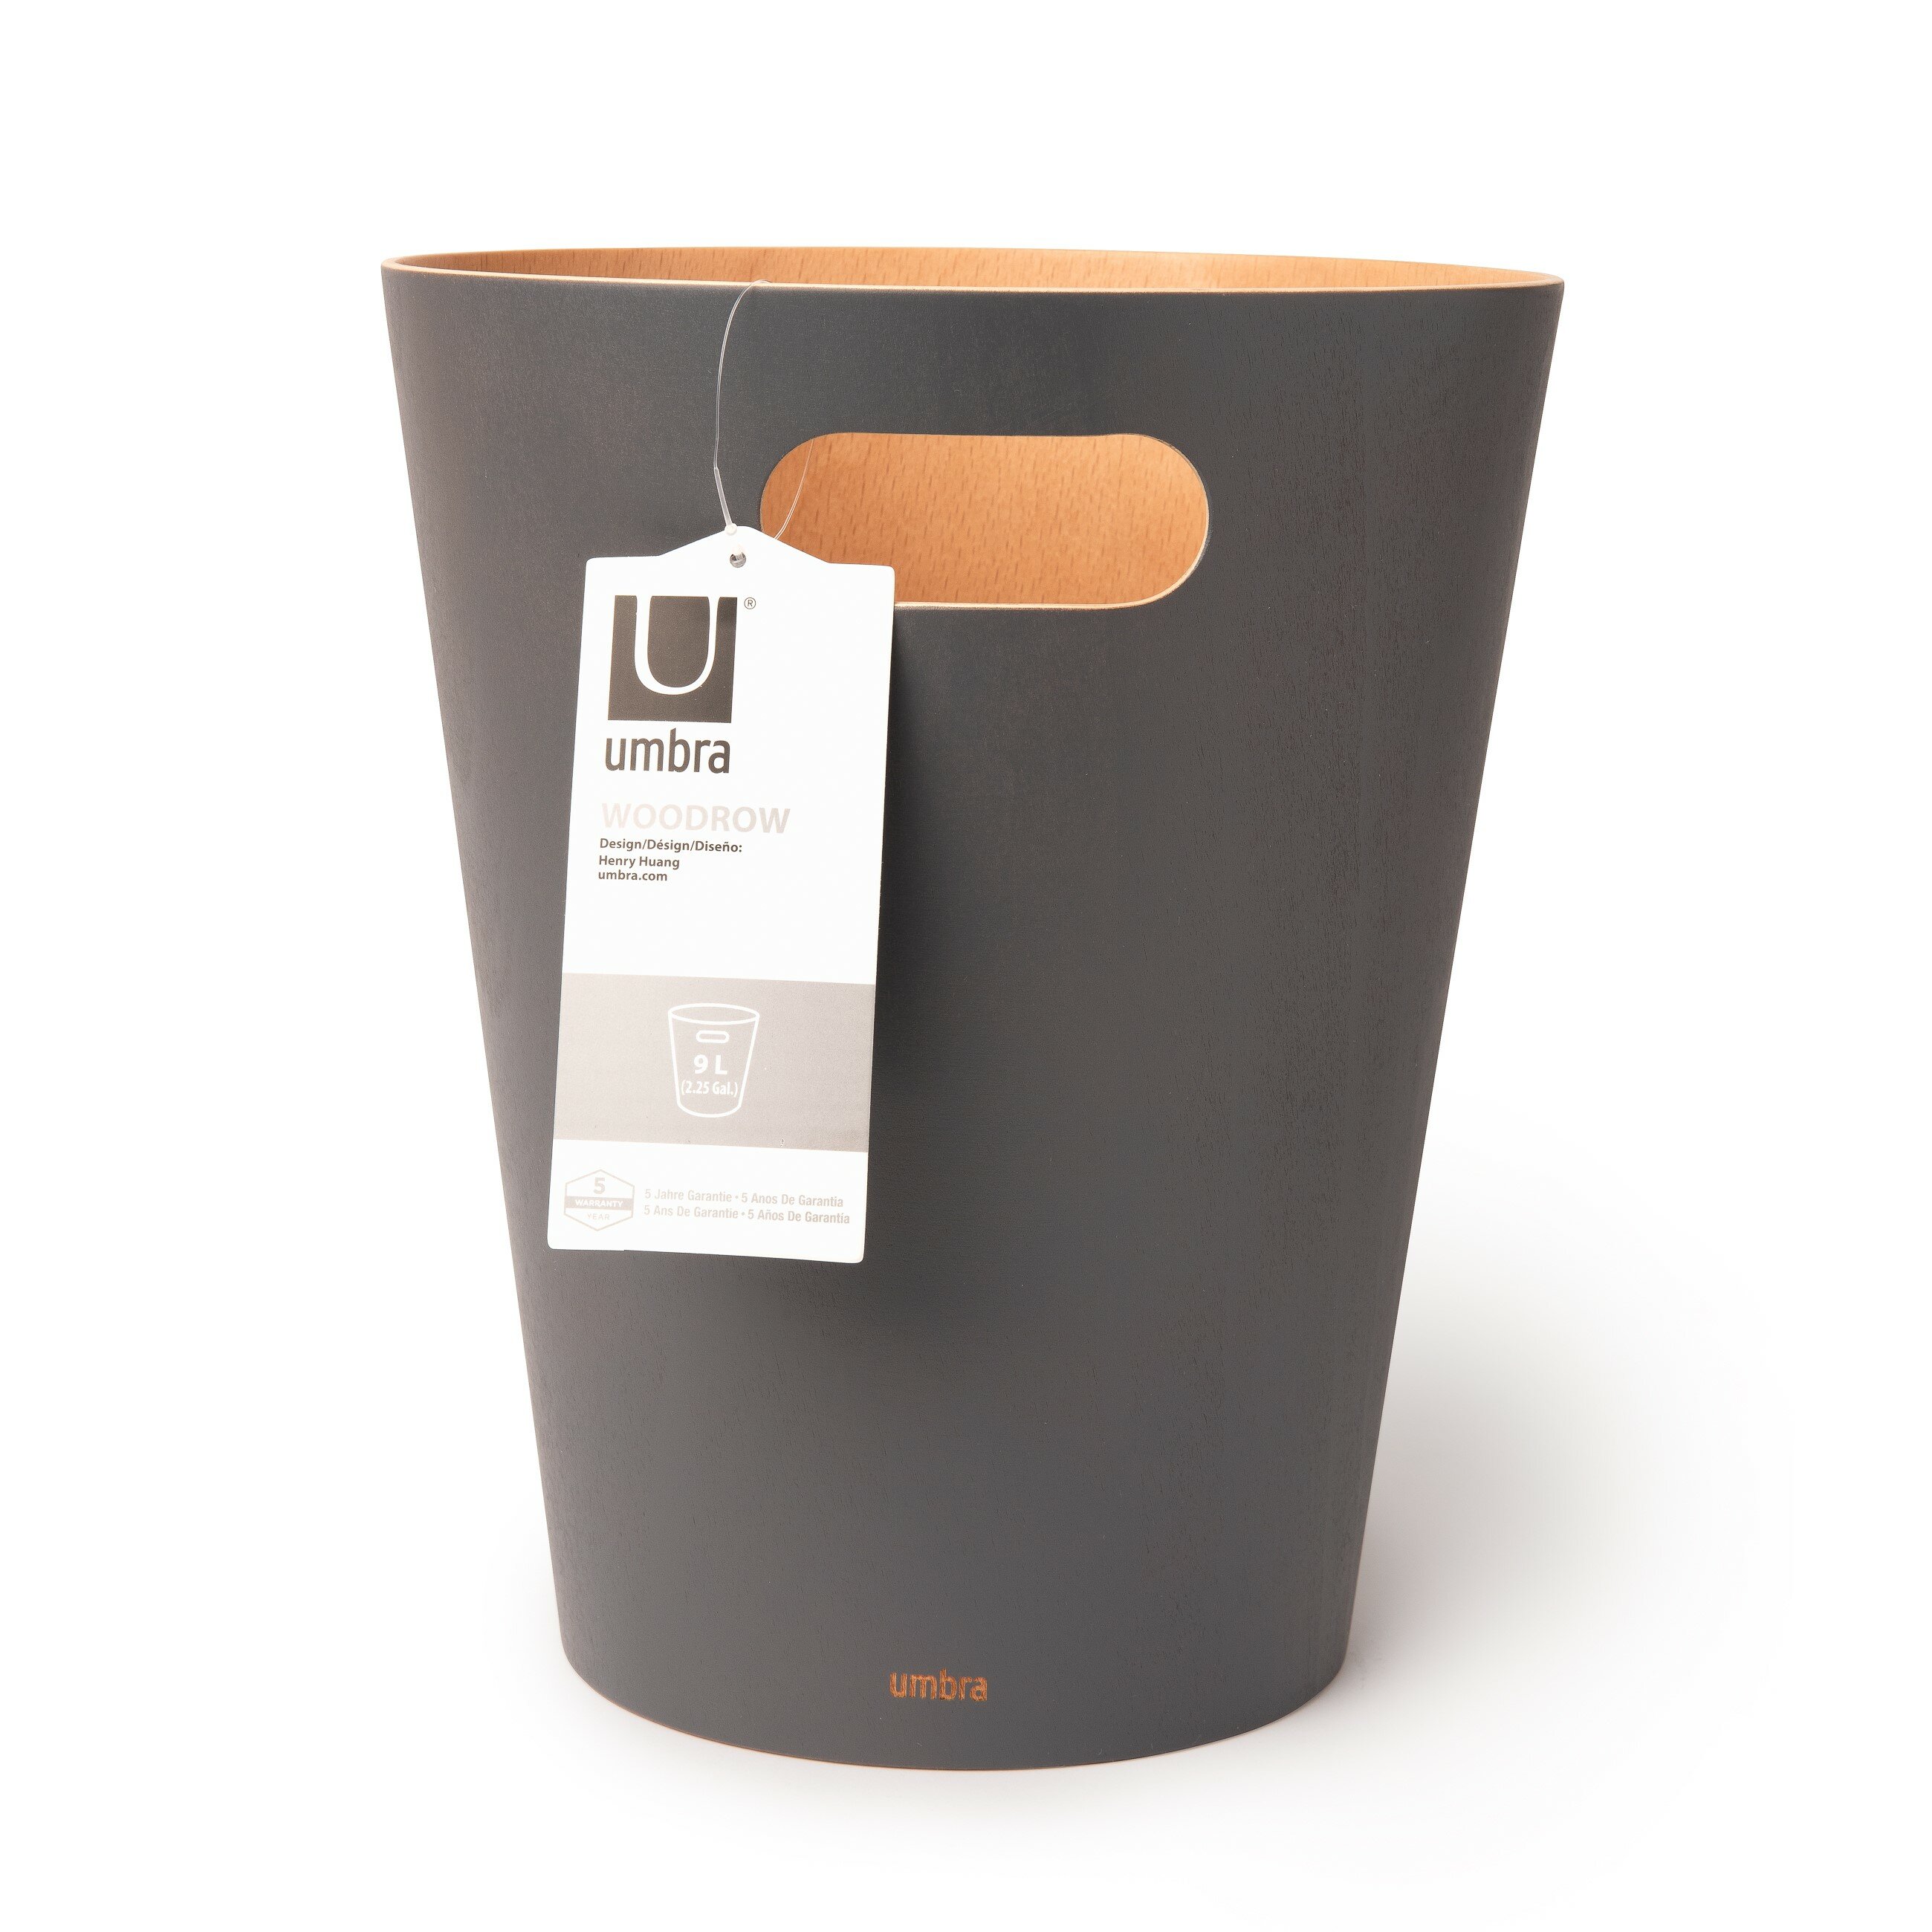 Pedal Bin in Wicker Design with Removable Tray and 20 Litre Capacity in brown   for your Bathroom Kitchen or Office 